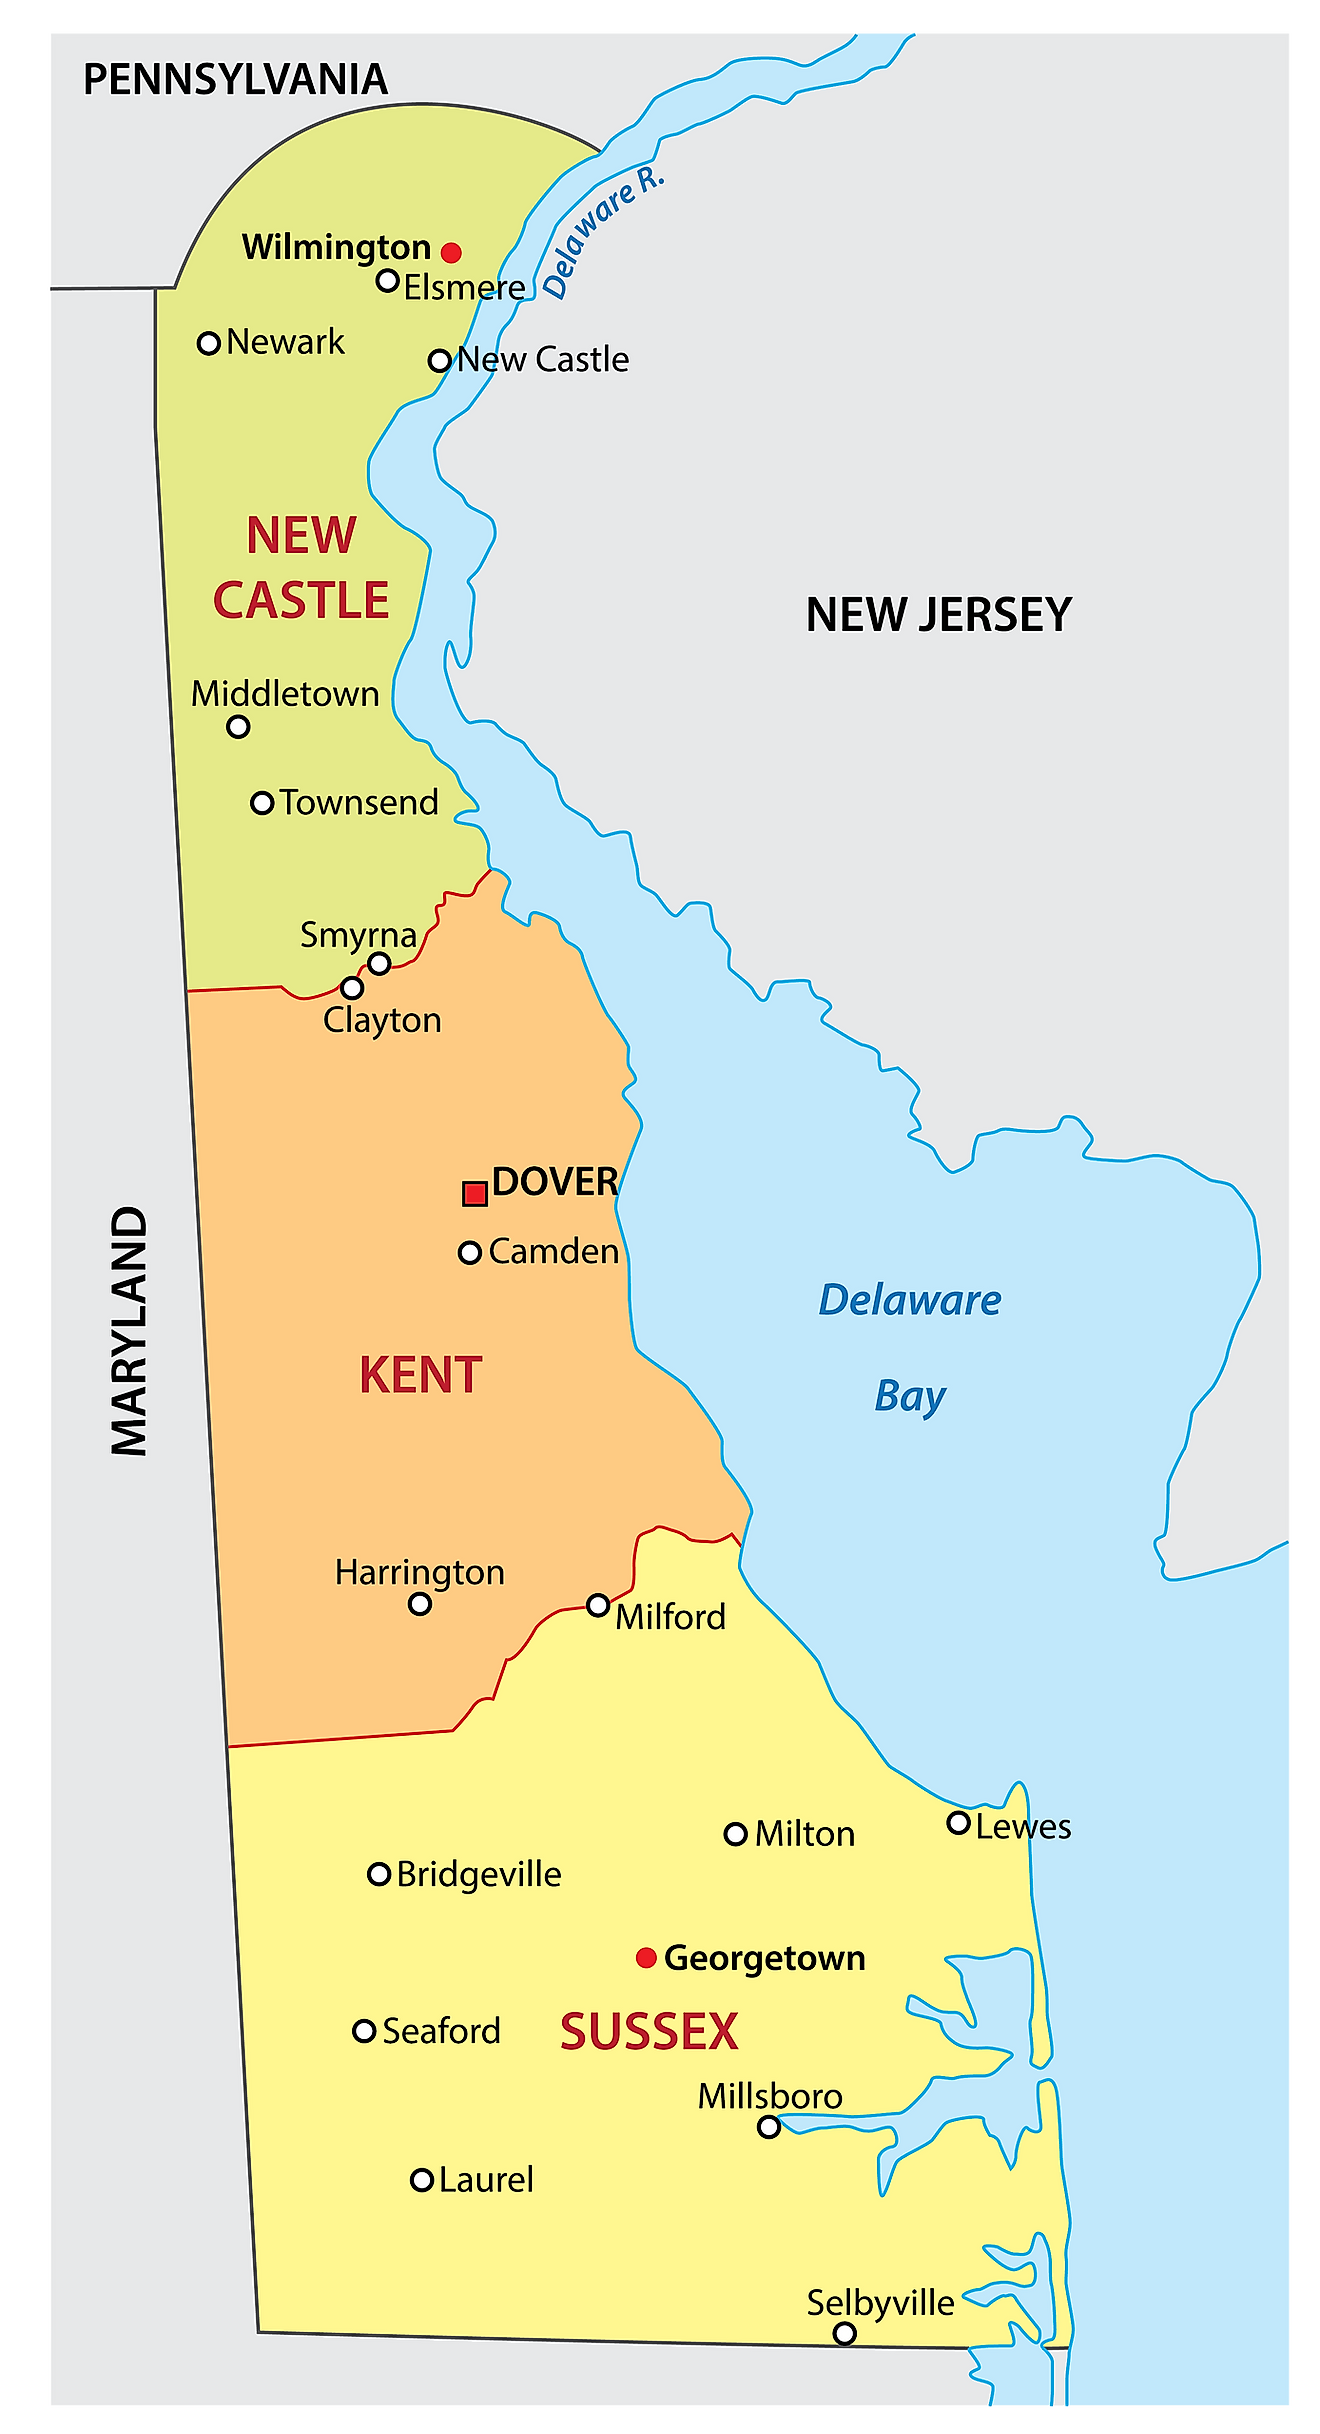 Administrative Map of Delaware showing its 3 counties and the capital city - Dover